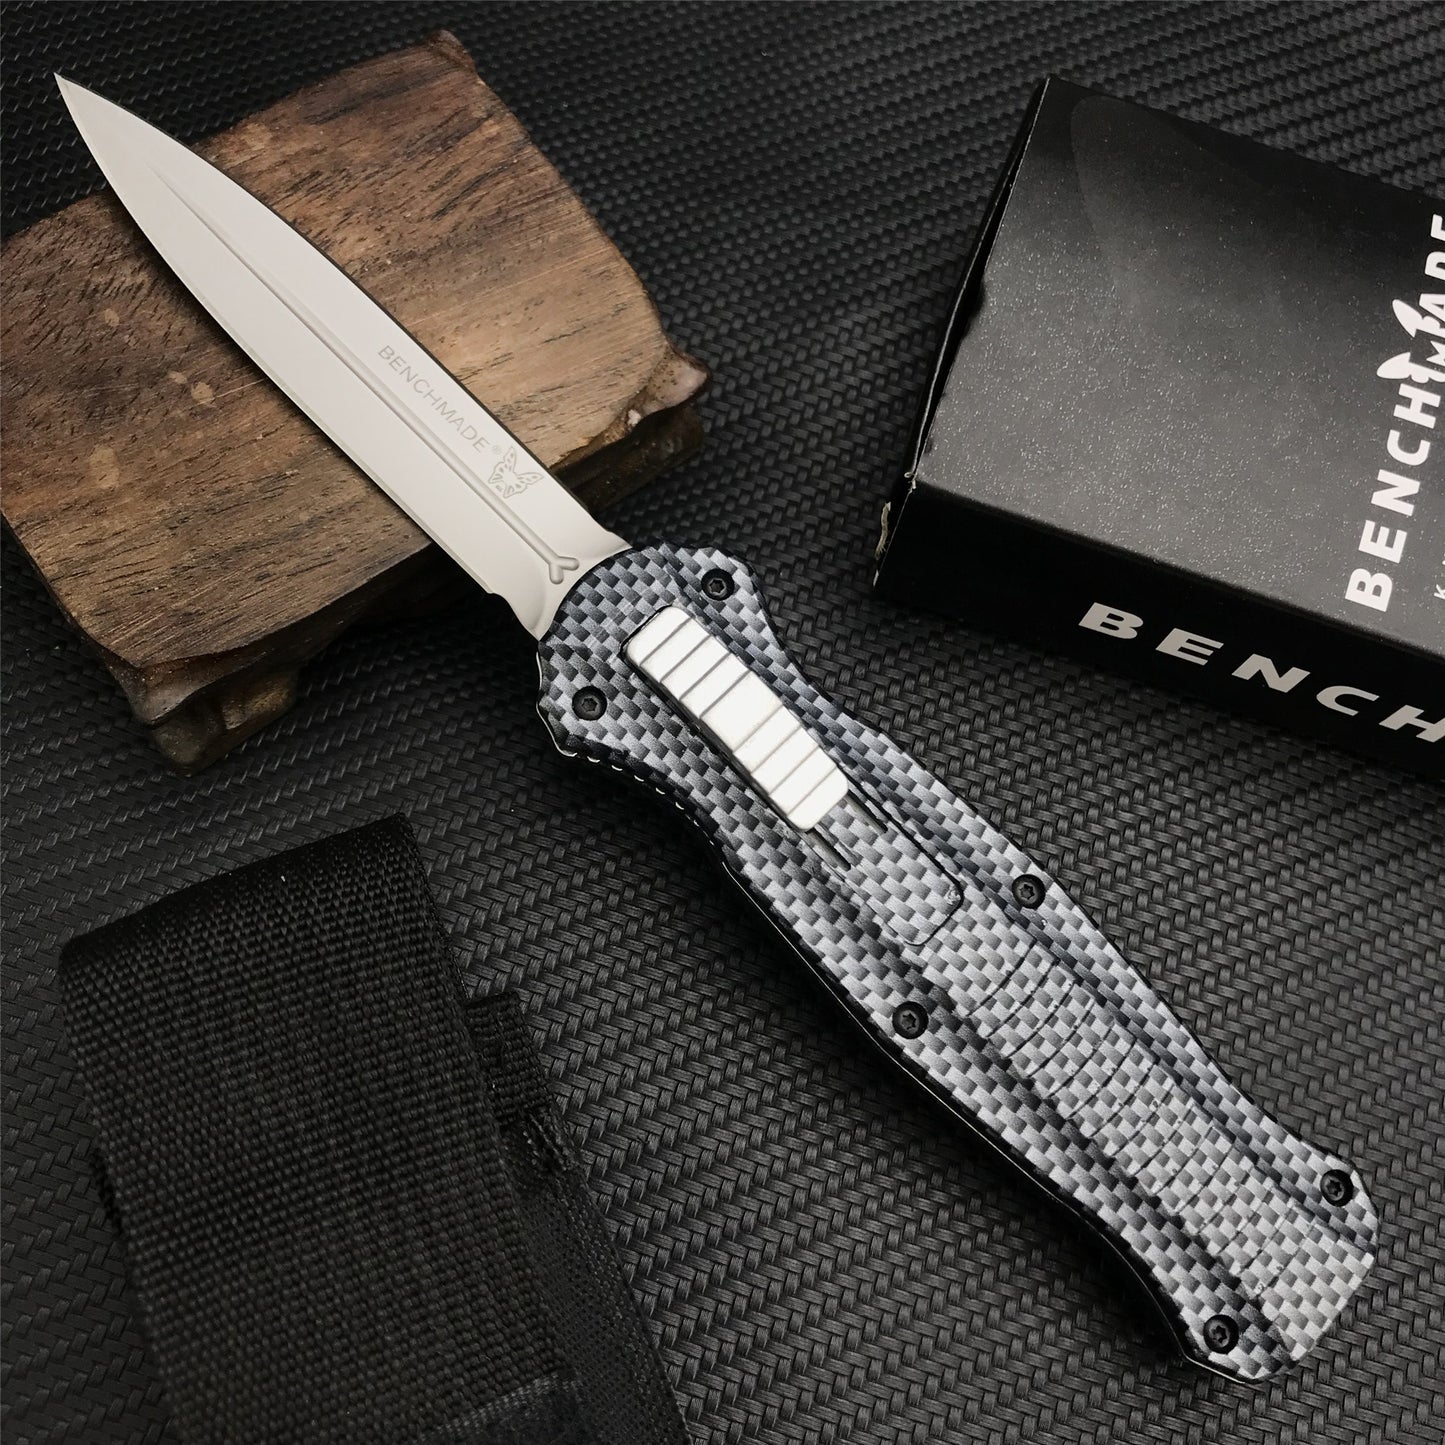 Hot Selling Benchmade 3300bk dagger Tactical Knives AUTO EDC Spring Assist Knife Fixed Blades Double Edge Survival Knifes Camping Hunting Cutting Knifes Fast Opening